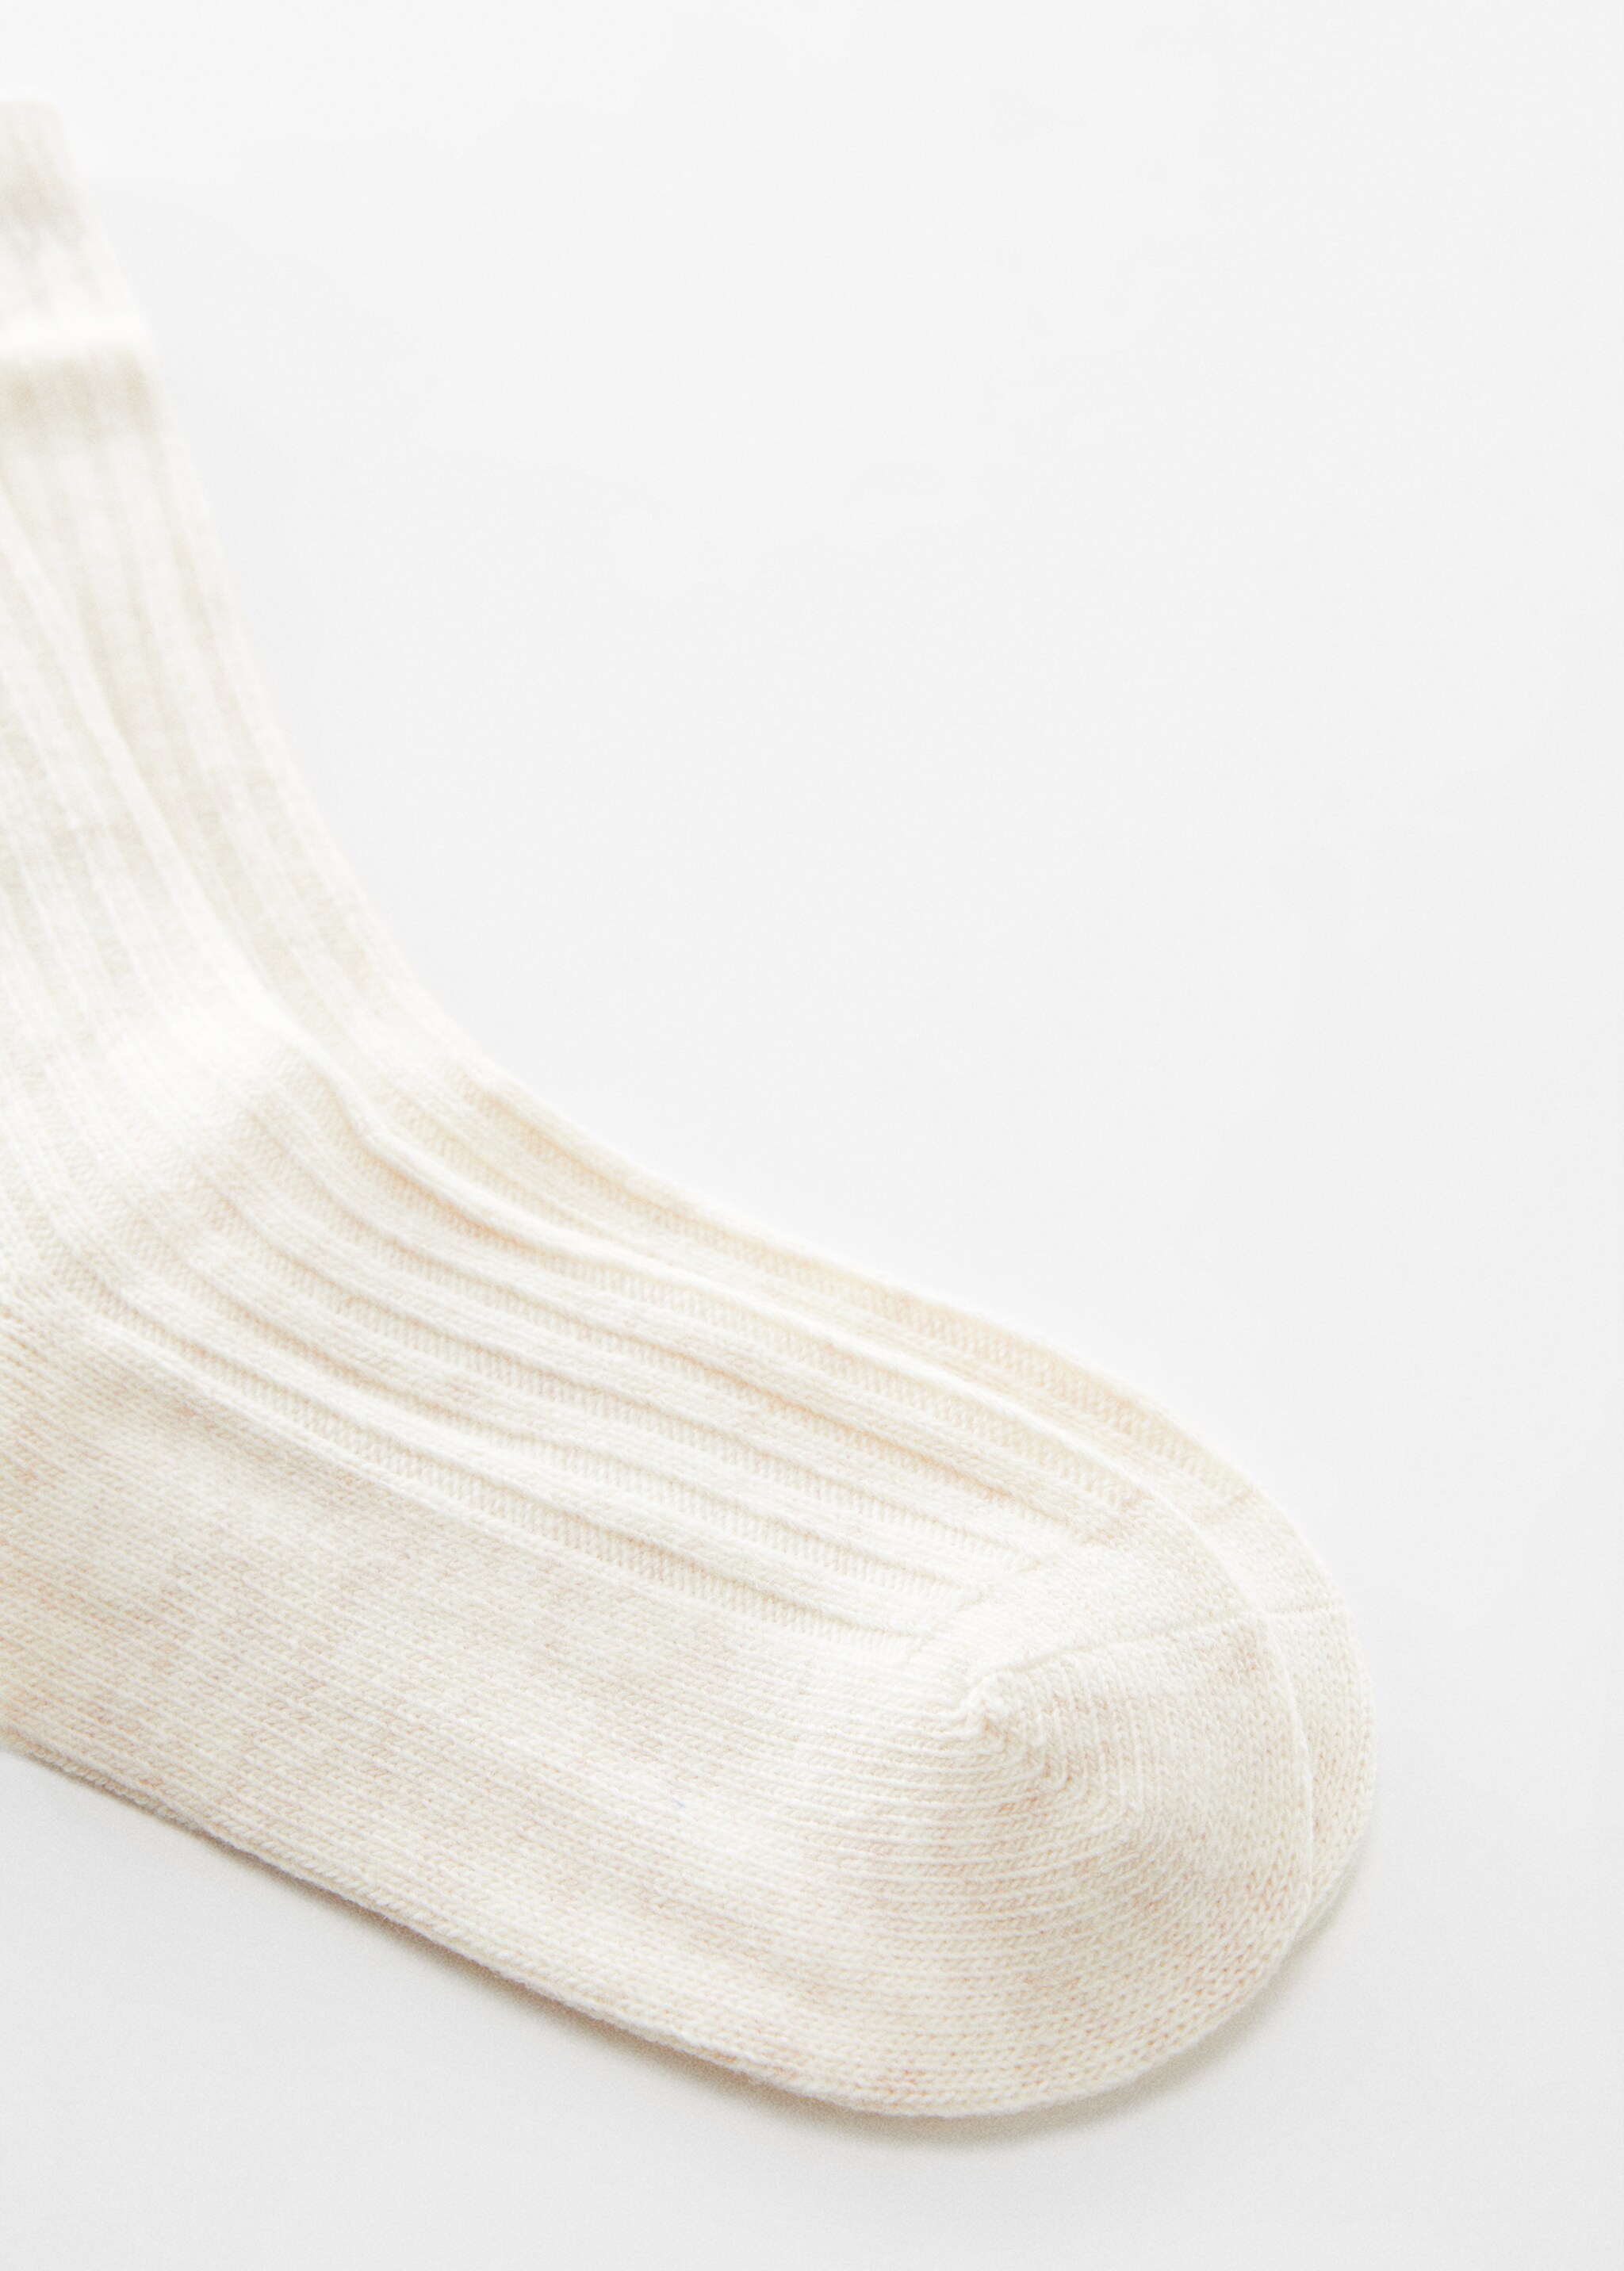 Ribbed socks - Details of the article 1